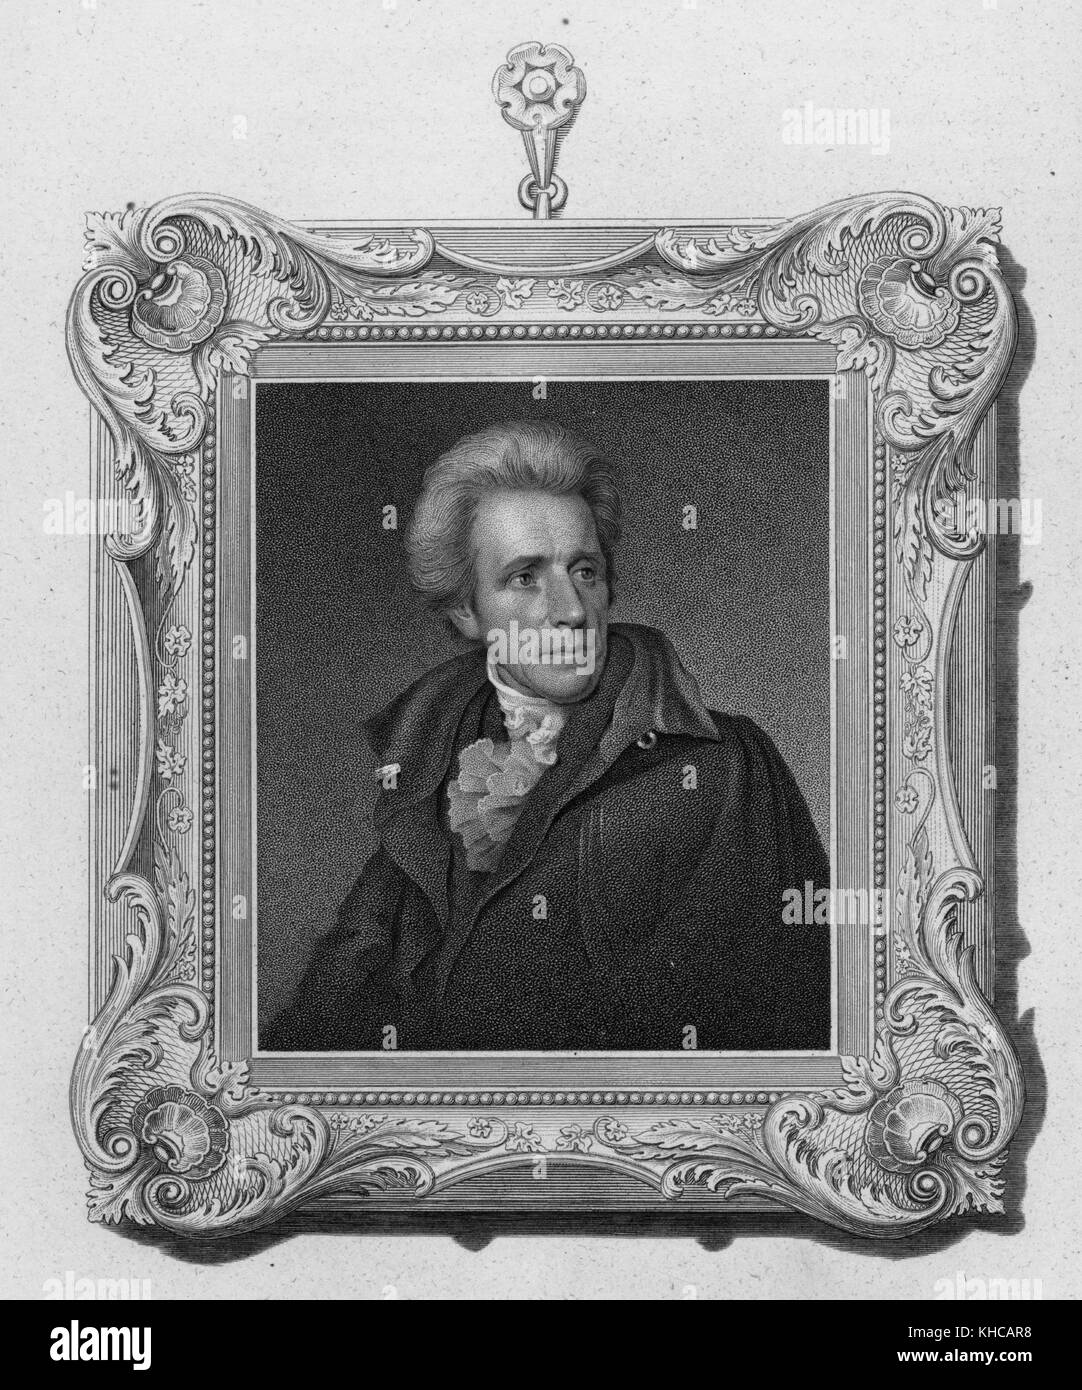 Engraved half length portrait of Andrew Jackson, seventh President of the United States, framed, ornate frame is part of the engraved image, 1881. From the New York Public Library. Stock Photo